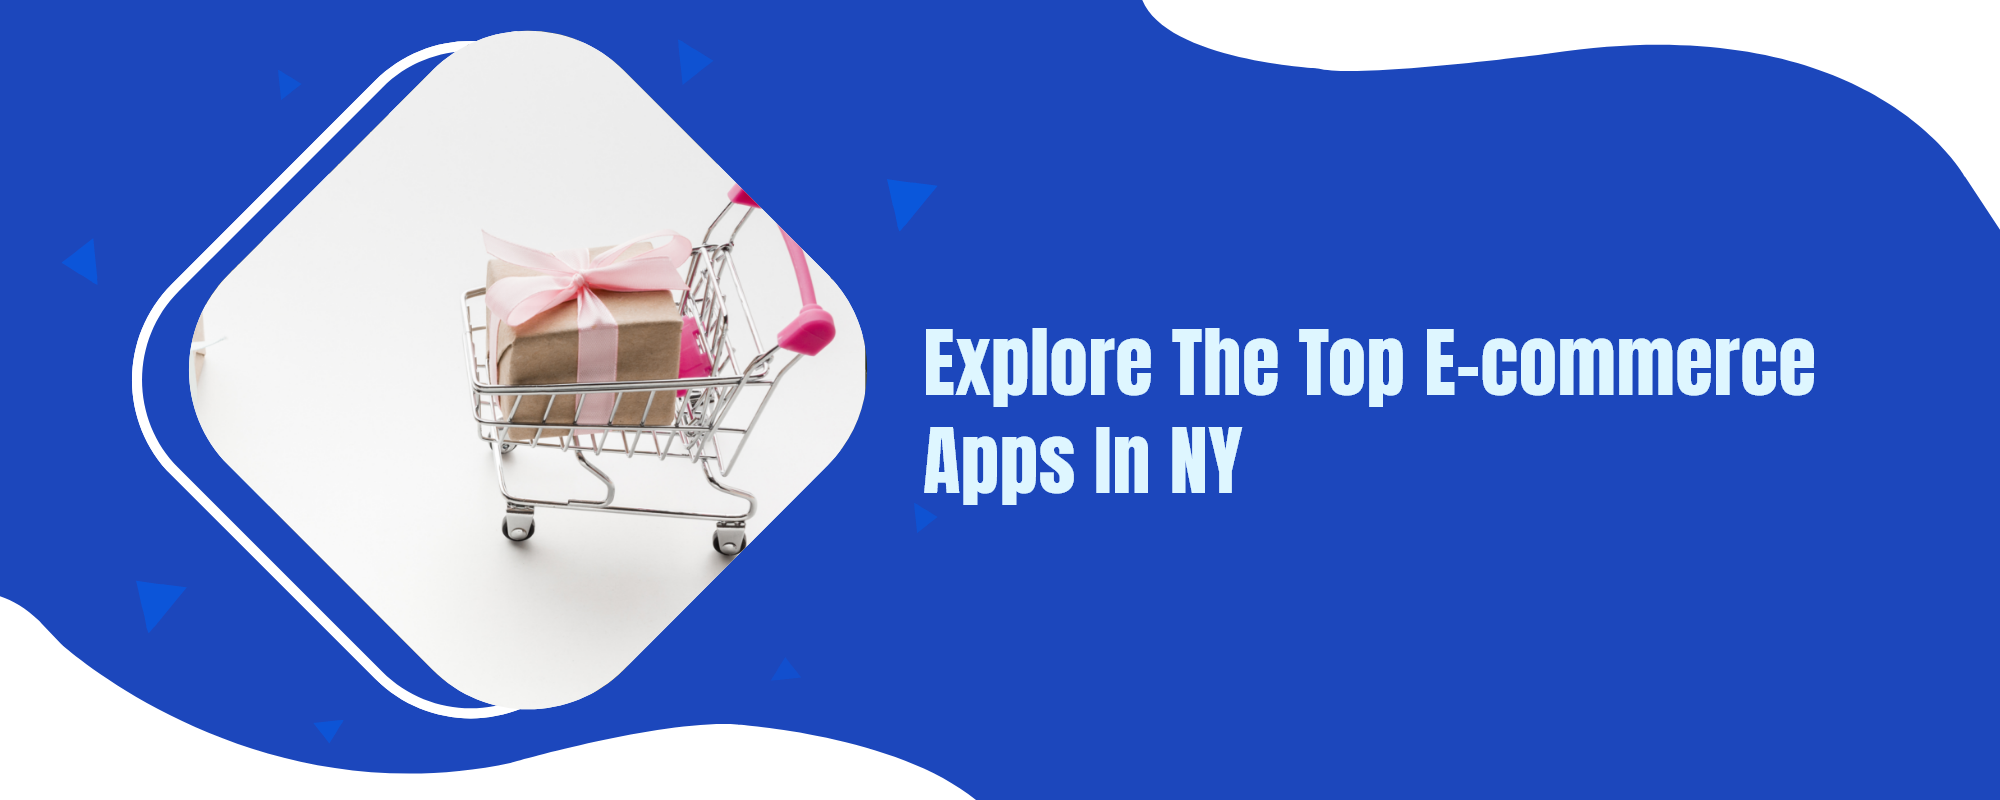 Top E-commerce apps In NY